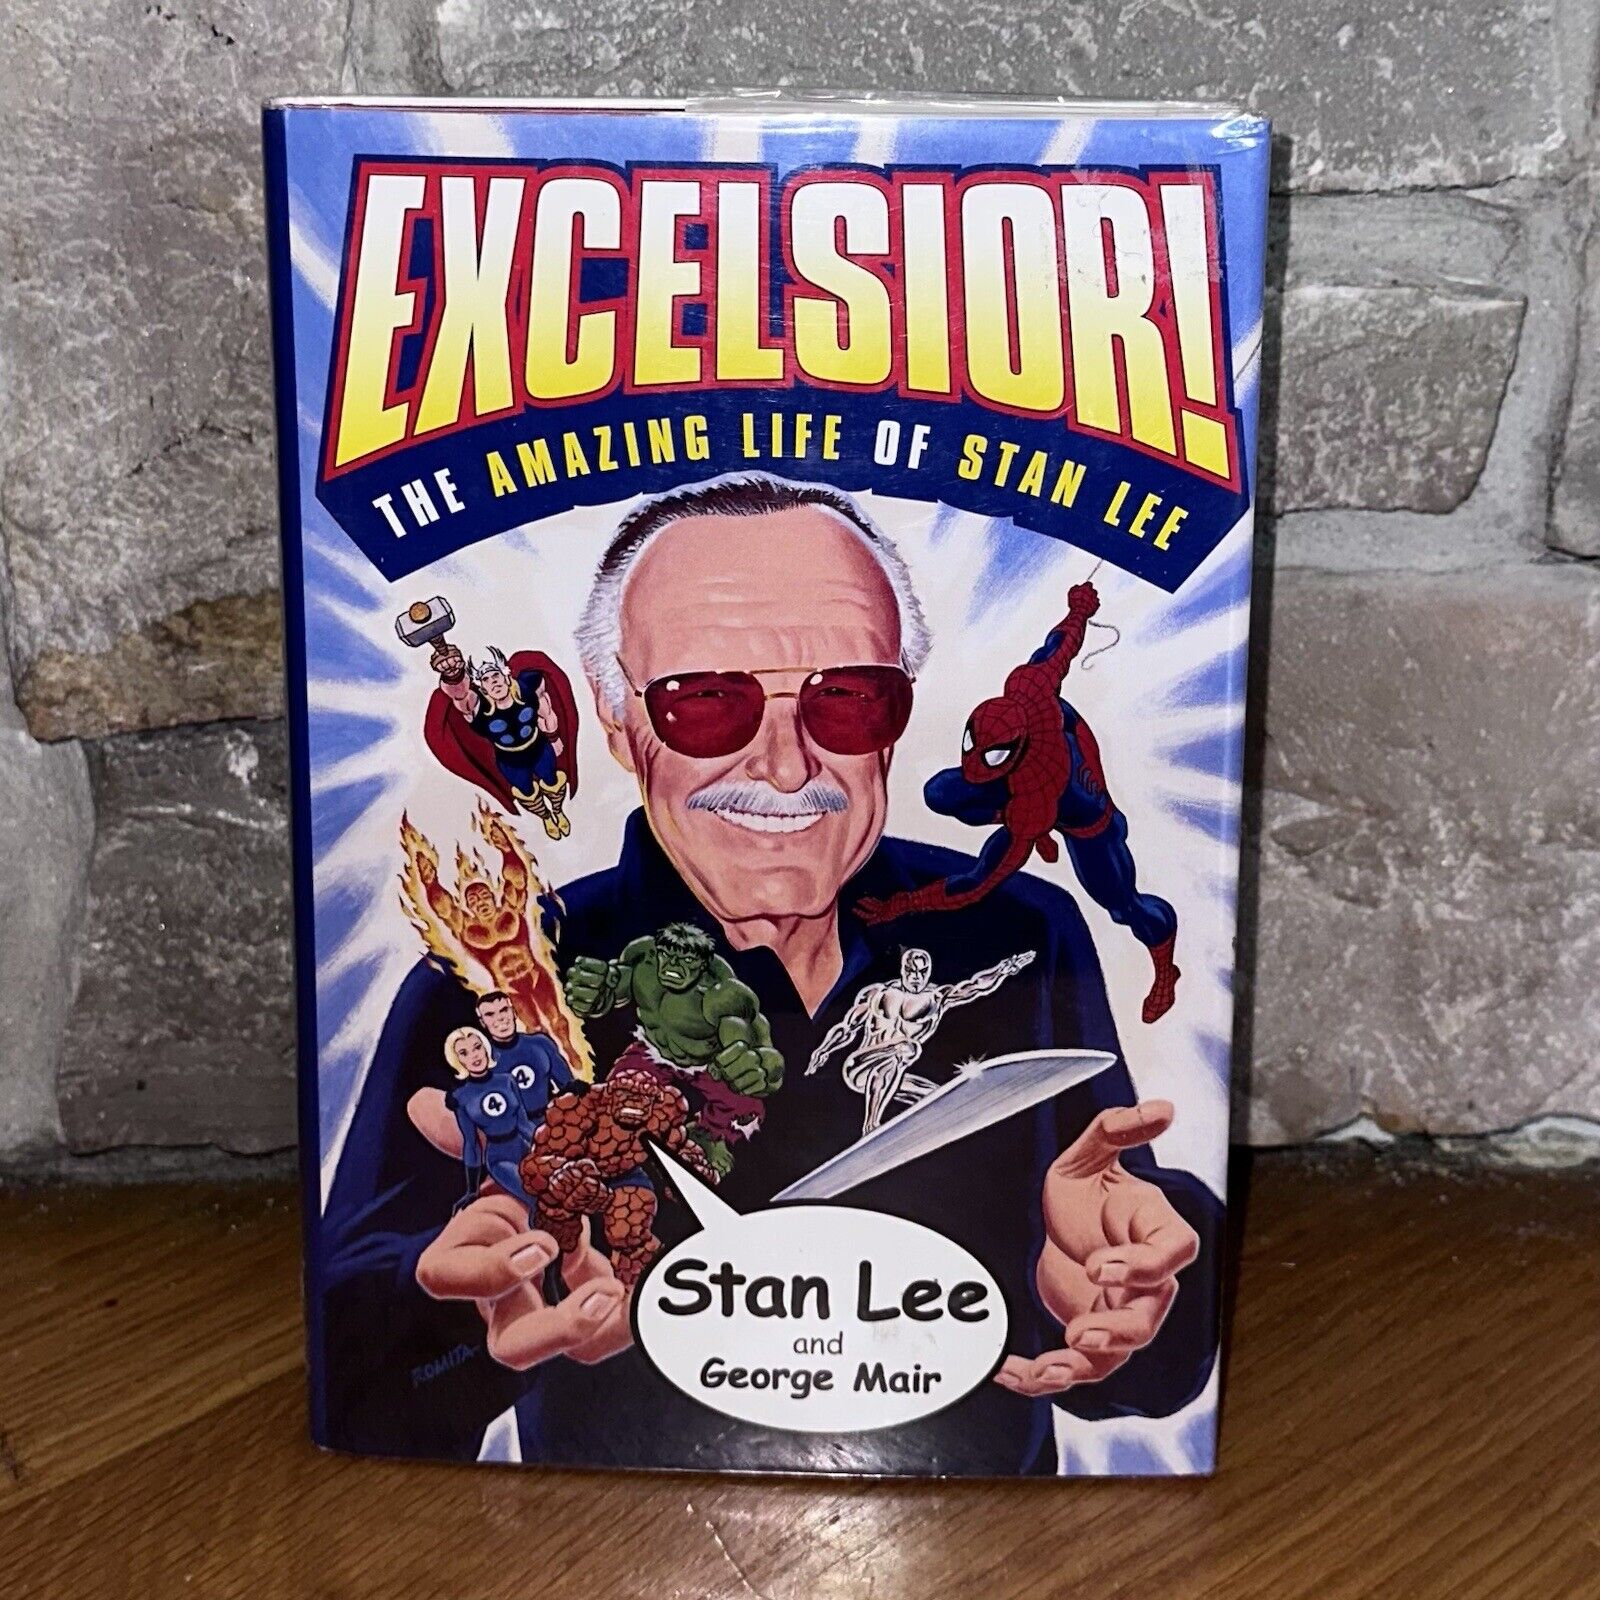 Mint Signed Excelsior The Amazing Life of Stan Lee 2002 Book 1063/3000 limited